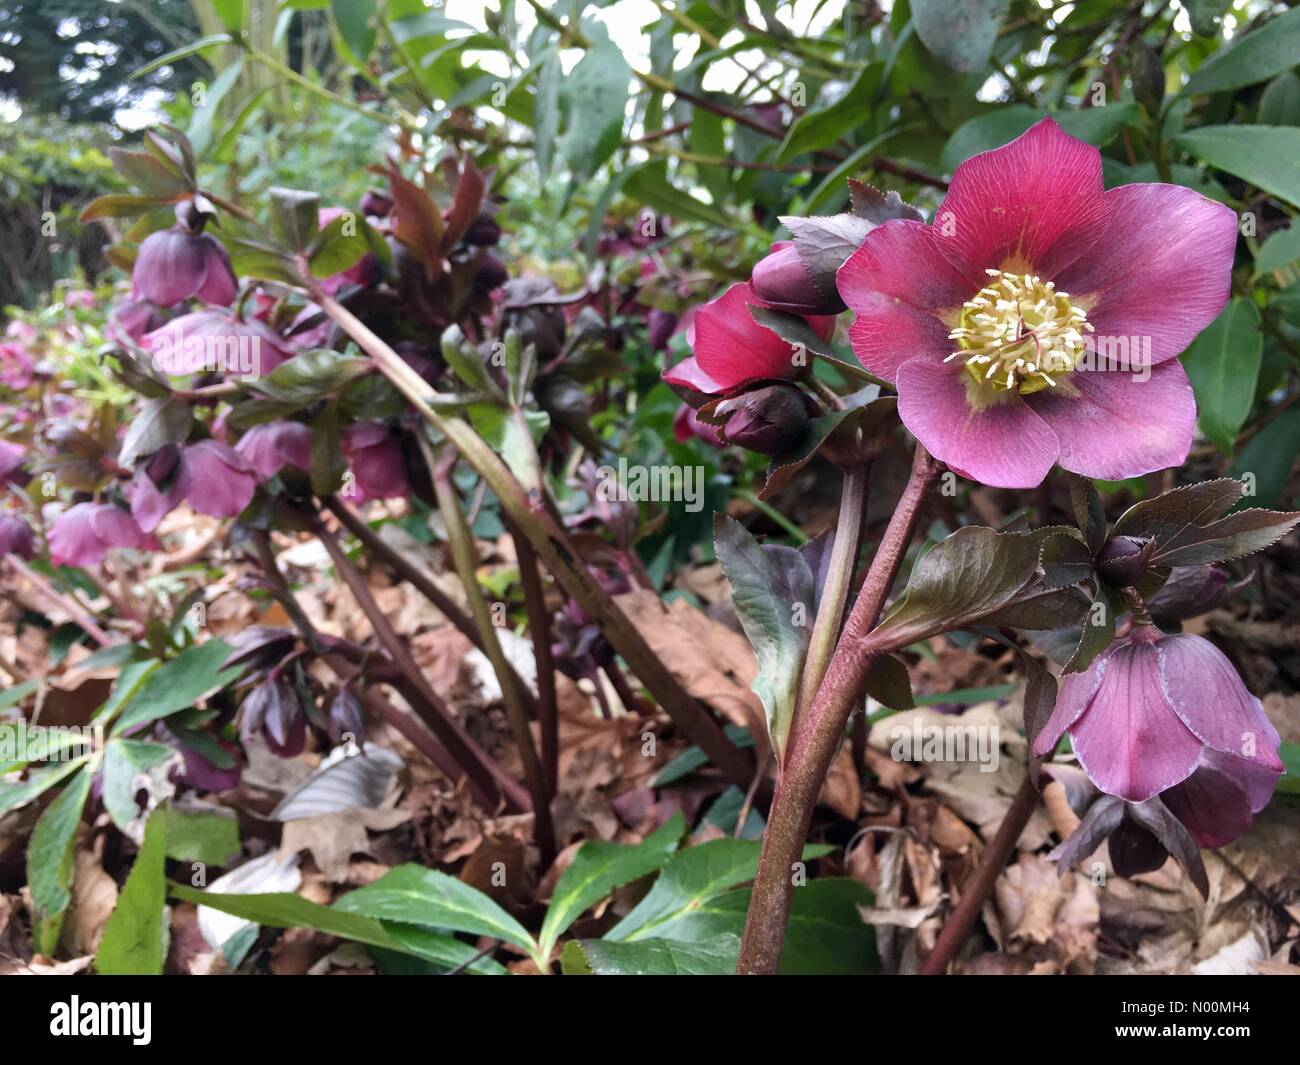 UK weather - 22nd March 2018 A cool overcast day at Roundhay Park in Leeds, Yorkshire. Even with overcast skies the hellebores were still looking beautiful. Stock Photo